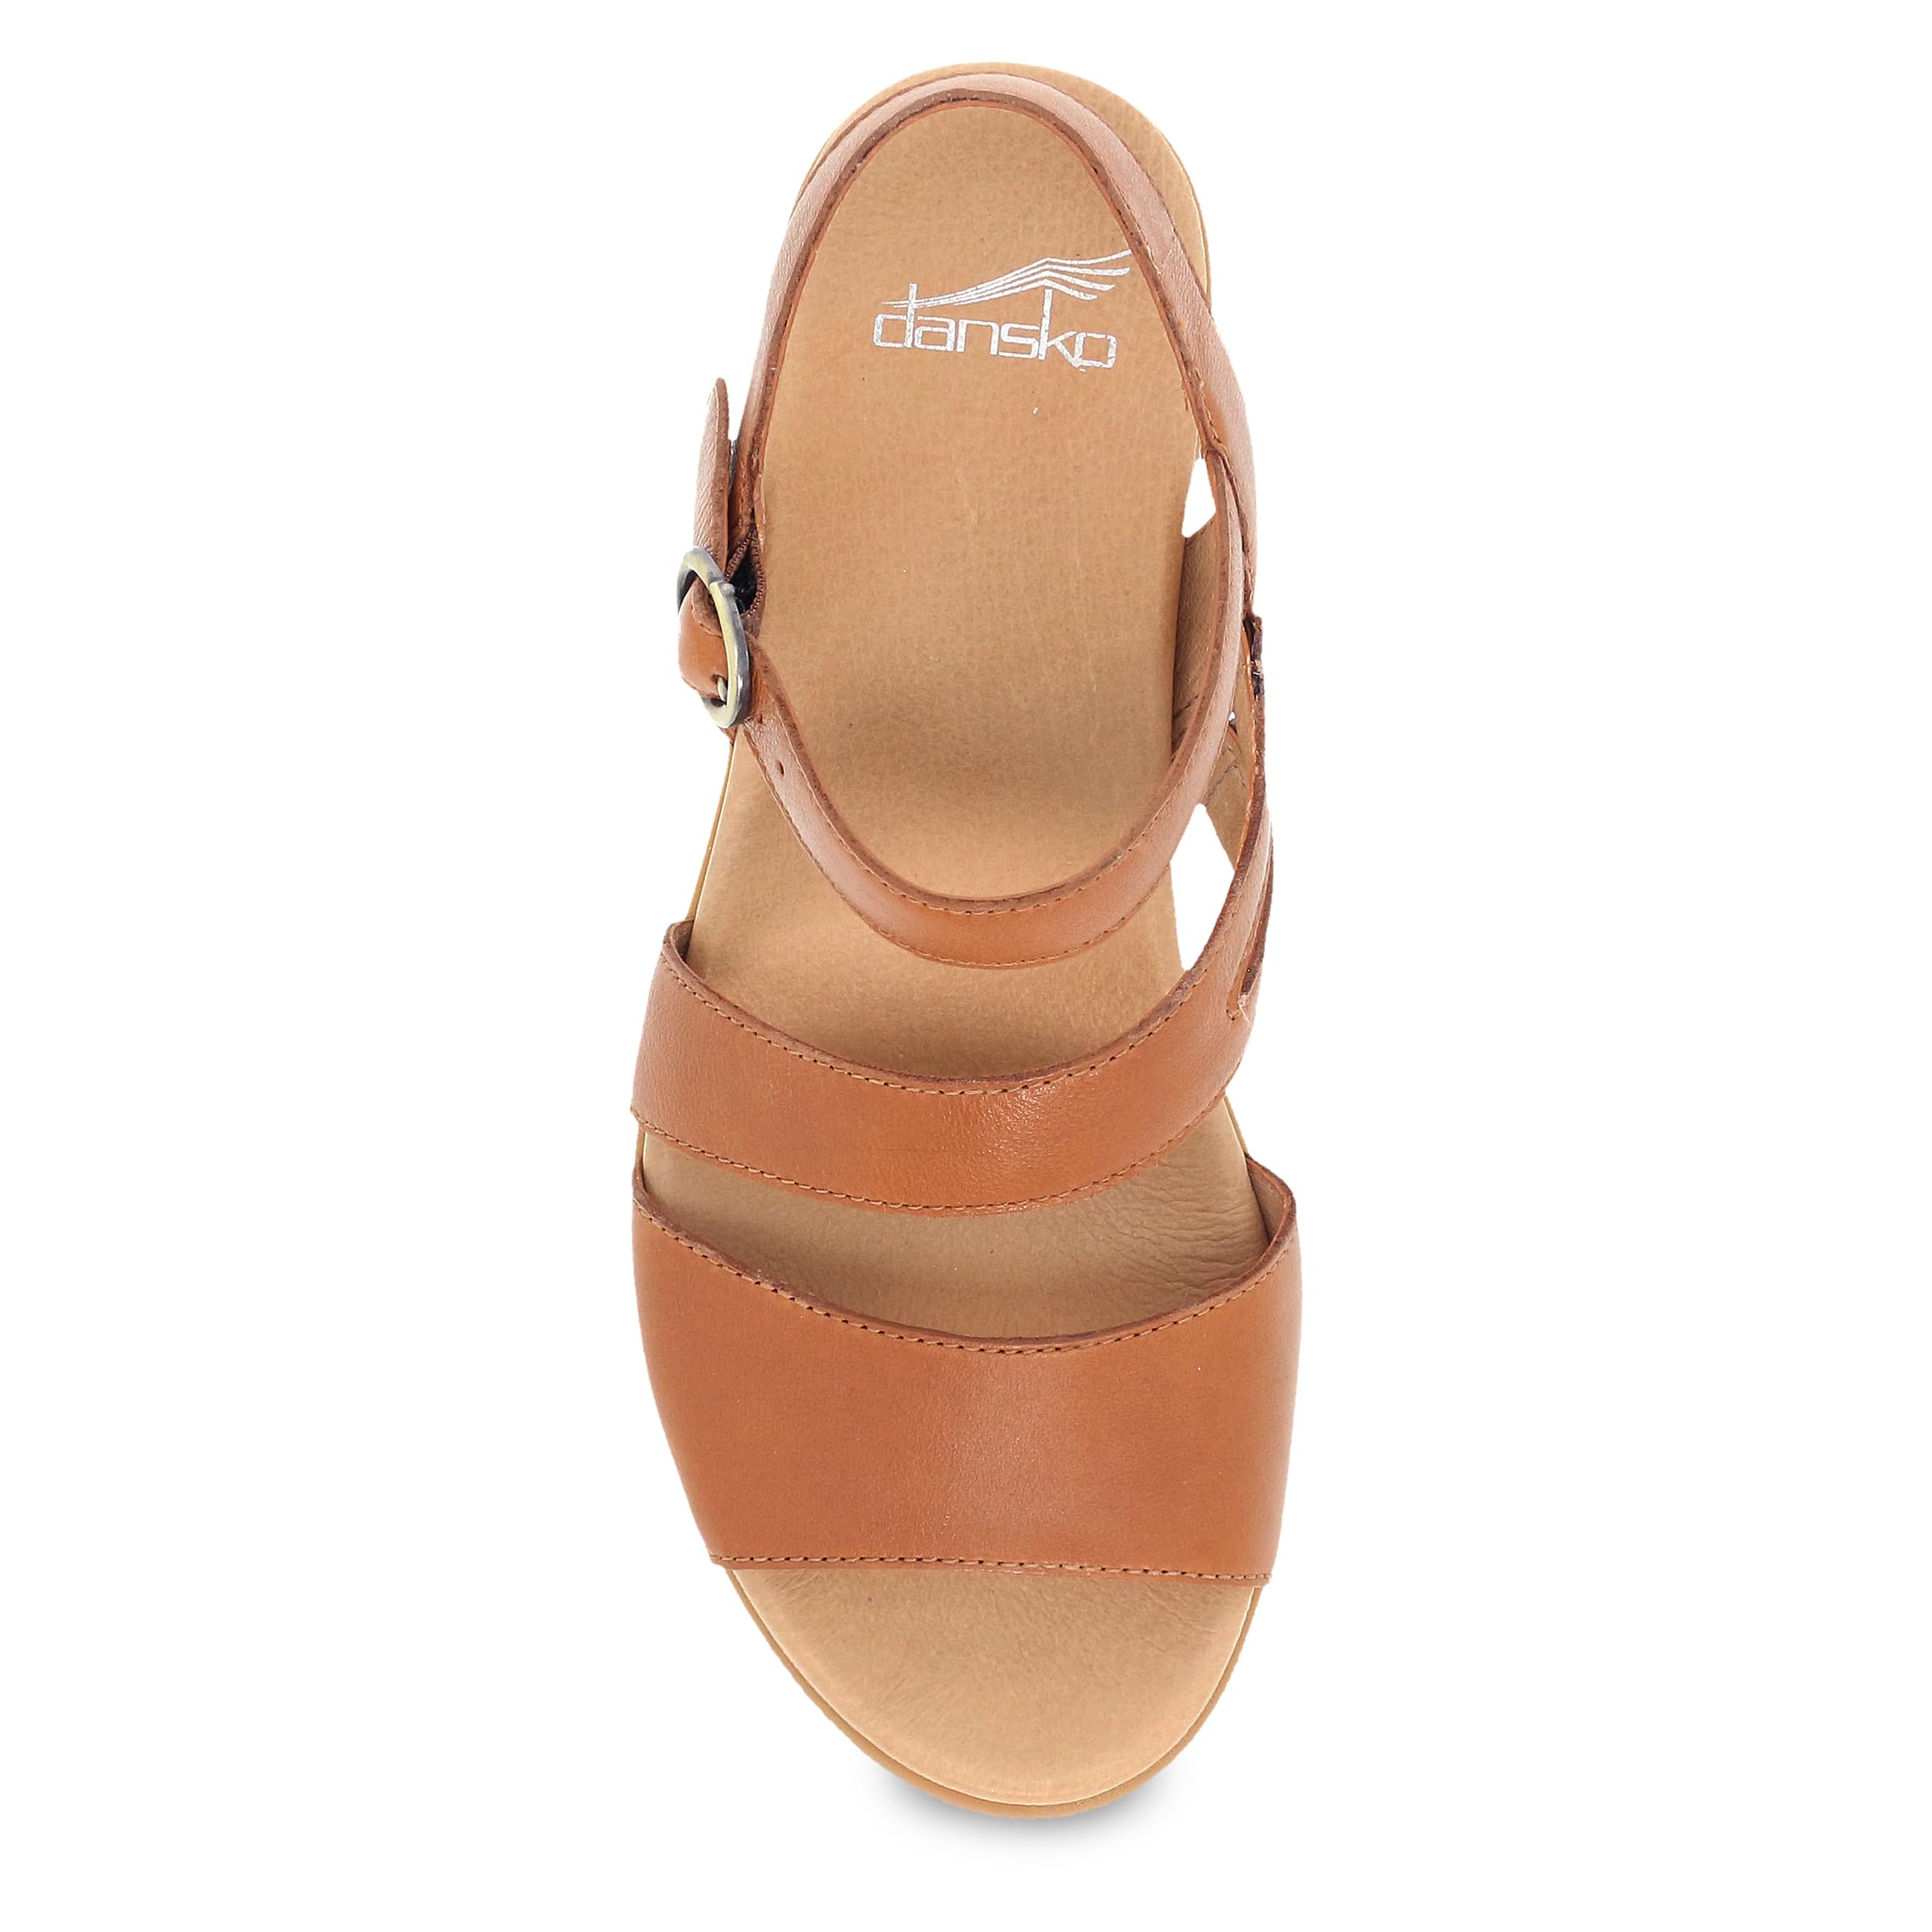 Dansko Tansy Multi-Strap Sandal for Women - A Subtle Heel and Memory Foam for All-Day Comfort - Unique Design for Easy Transition from Work to Evening